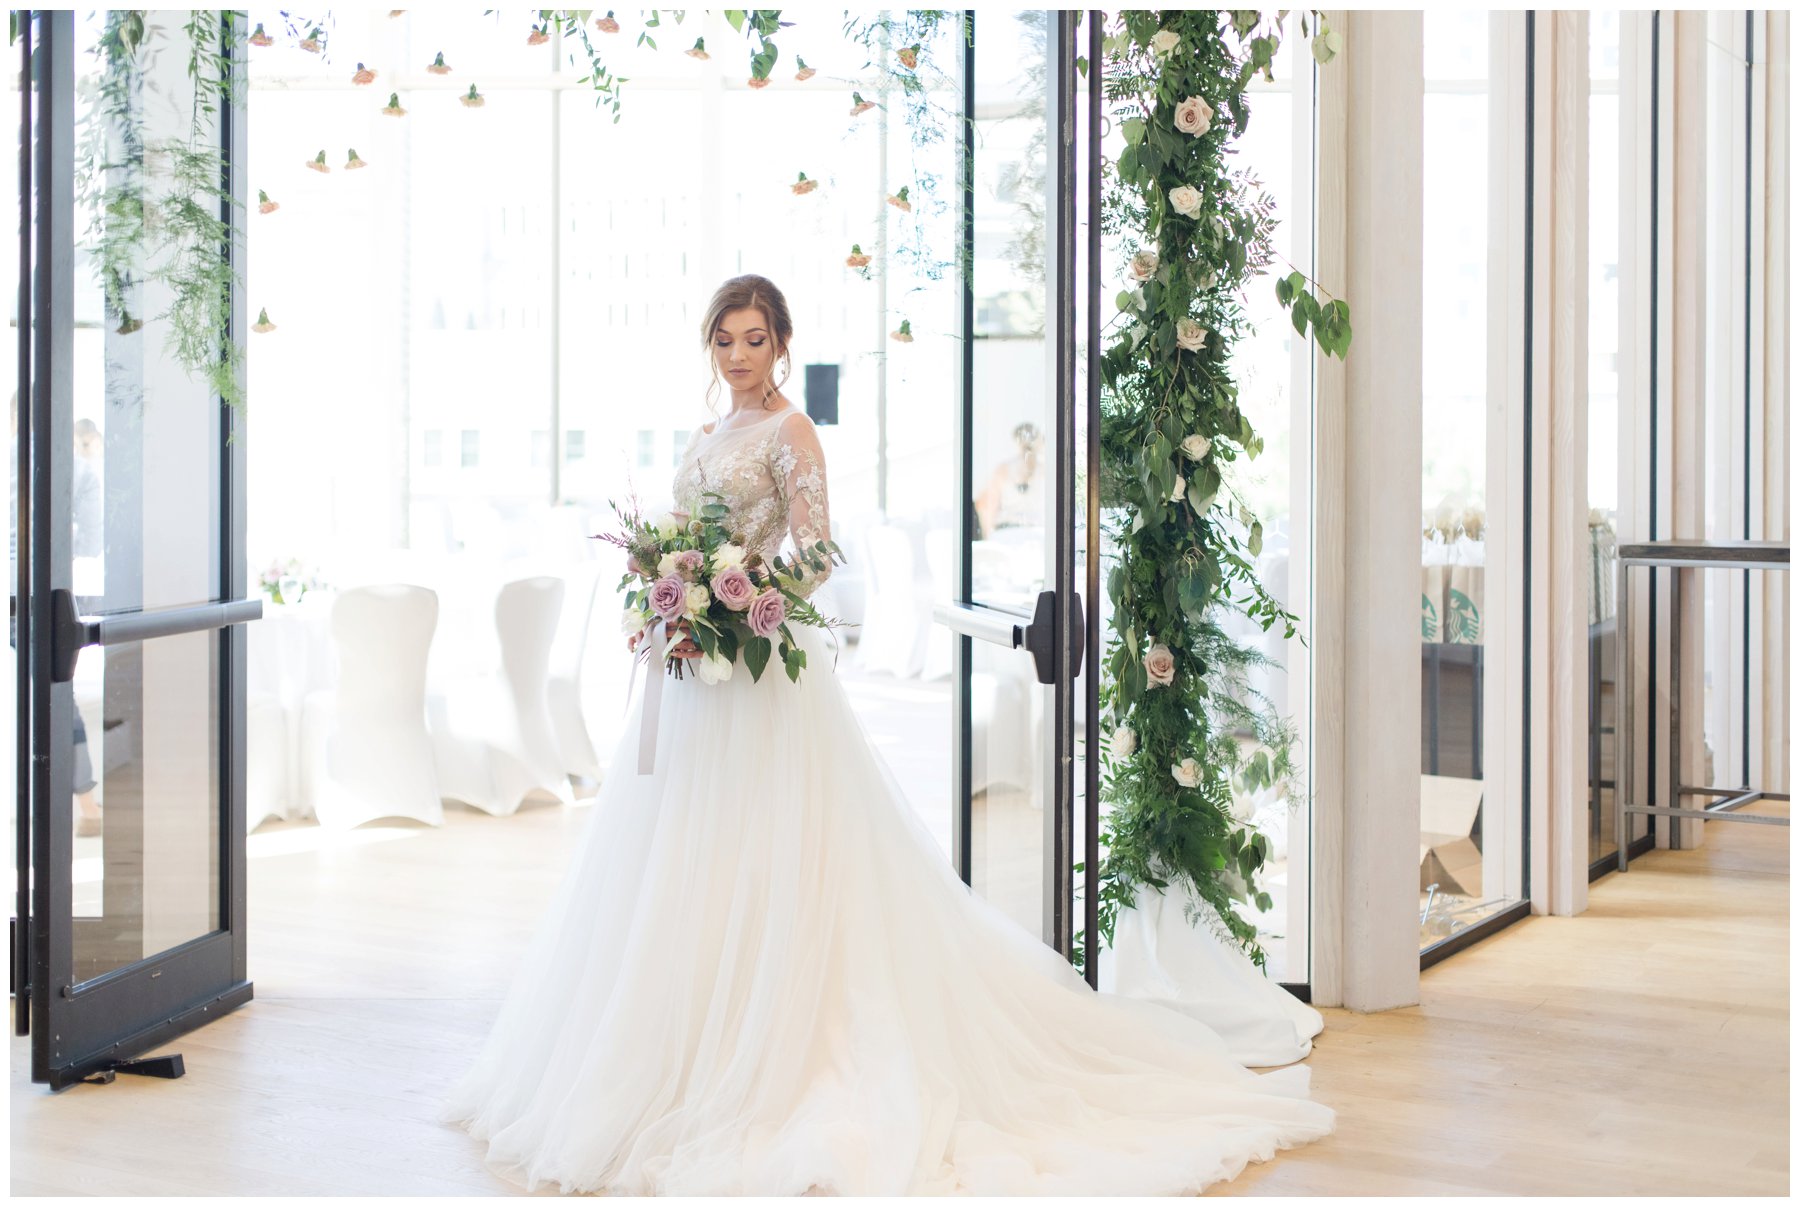 Fairytale wedding with lots of florals - Flower doorway arch by Capital Florist- Bride with white Nicole Spose’s dress from Sinders Bridal at Ottawa's NAC O'Born room wedding venue: The Barnett Company - Ottawa Wedding Photographer